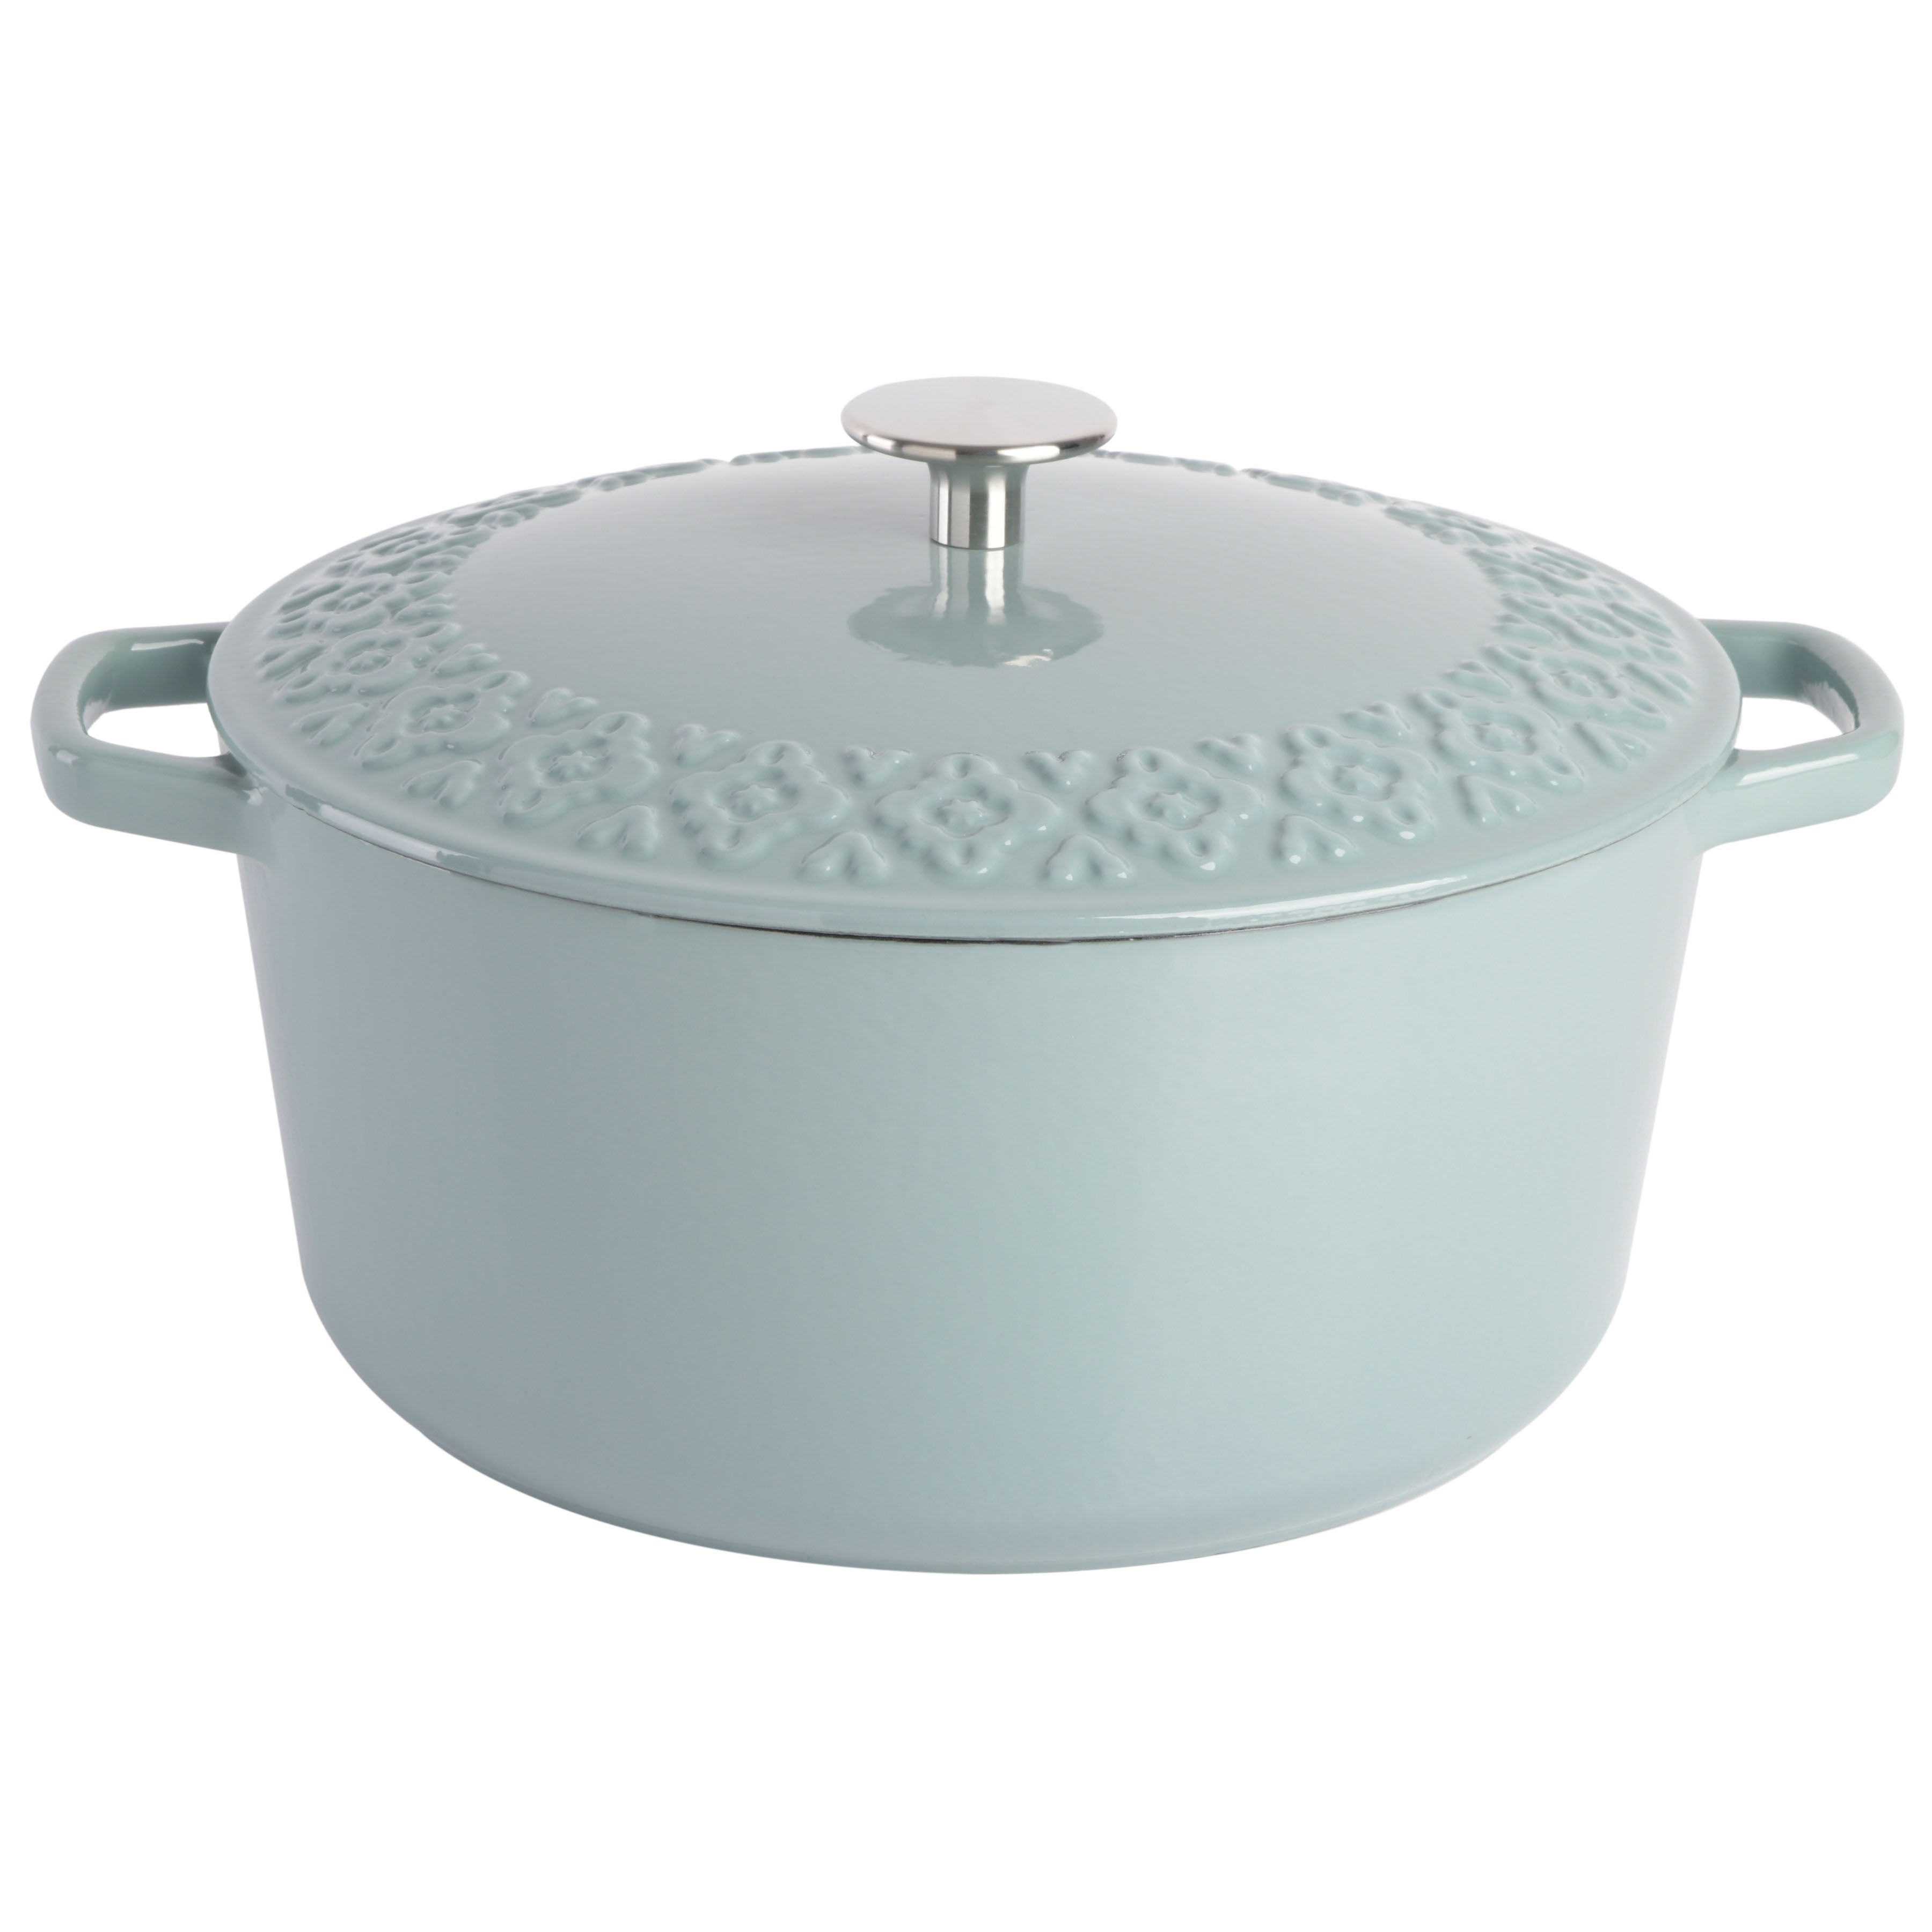 Spice by Tia Mowry Savory Saffron Healthy Nonstick 5qt Dutch Oven with  Steamer Insert - Mint